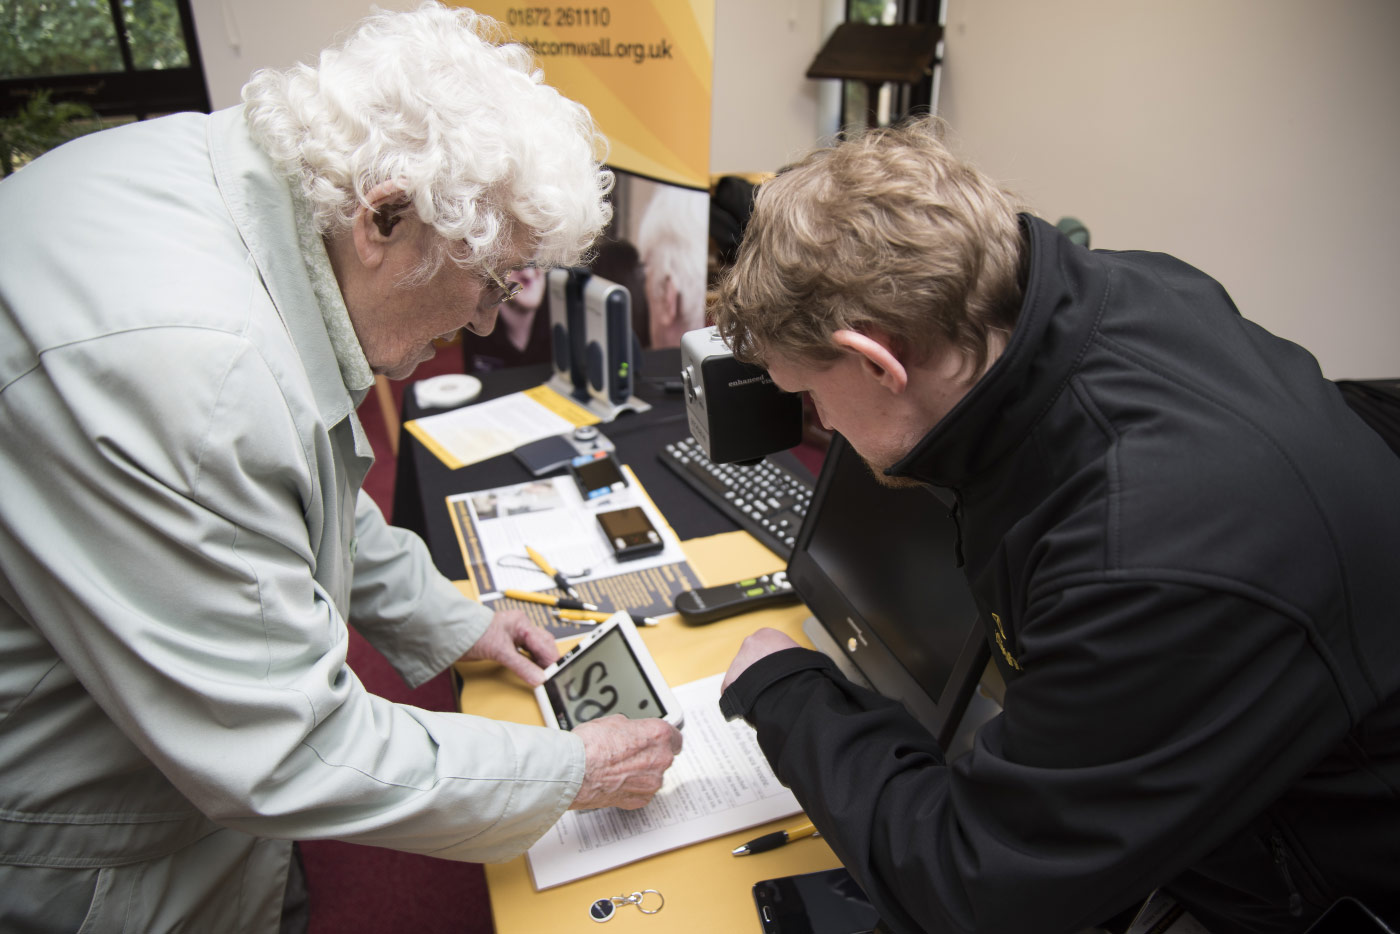 Dominic from iSightCornwall demonstrates a portable handheld magnifier to a lady in a white coat.